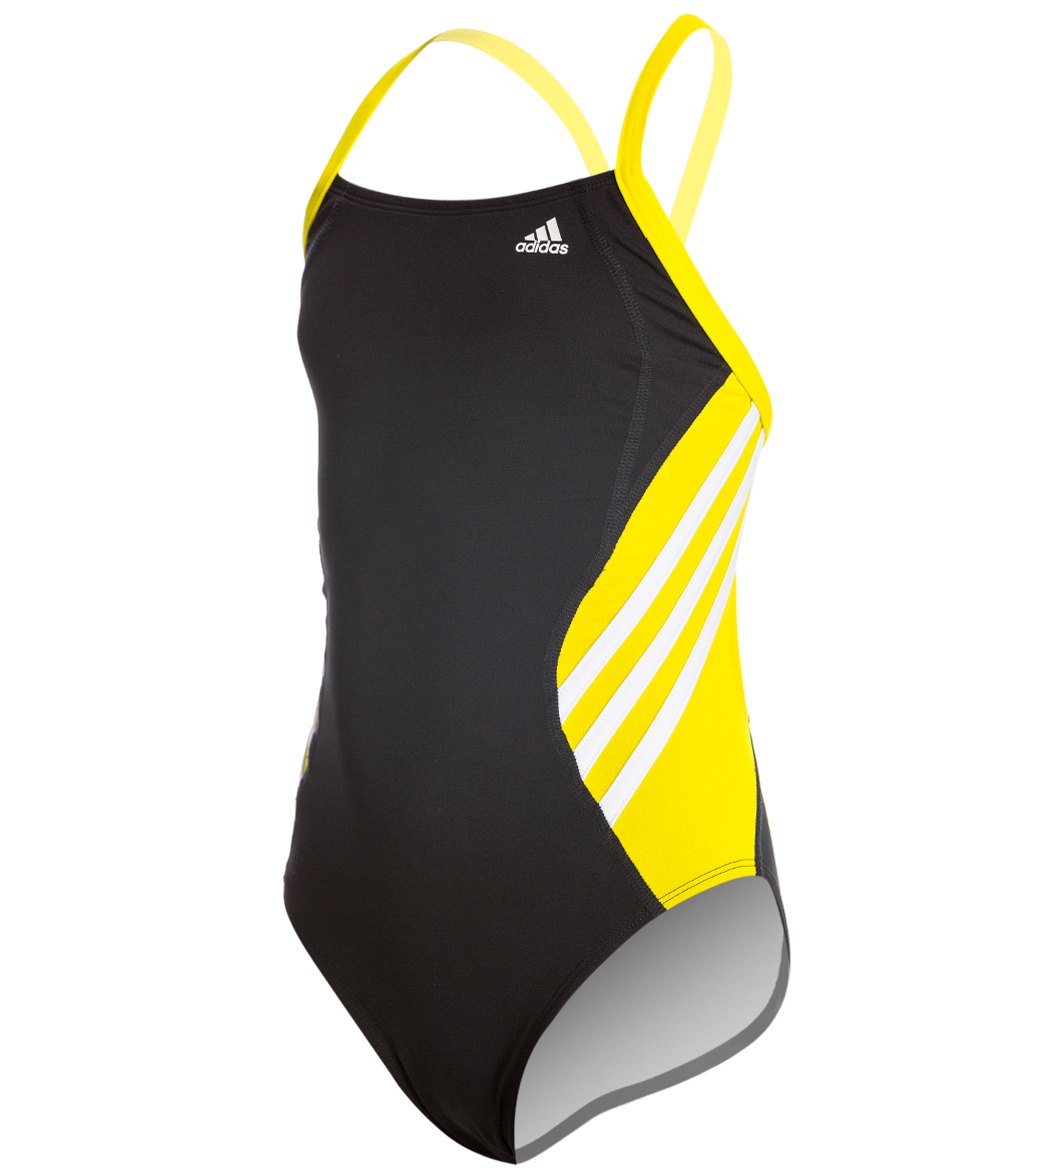 Adidas Youth Solid Splice Vortex Back One Piece Swimsuit at SwimOutlet.com